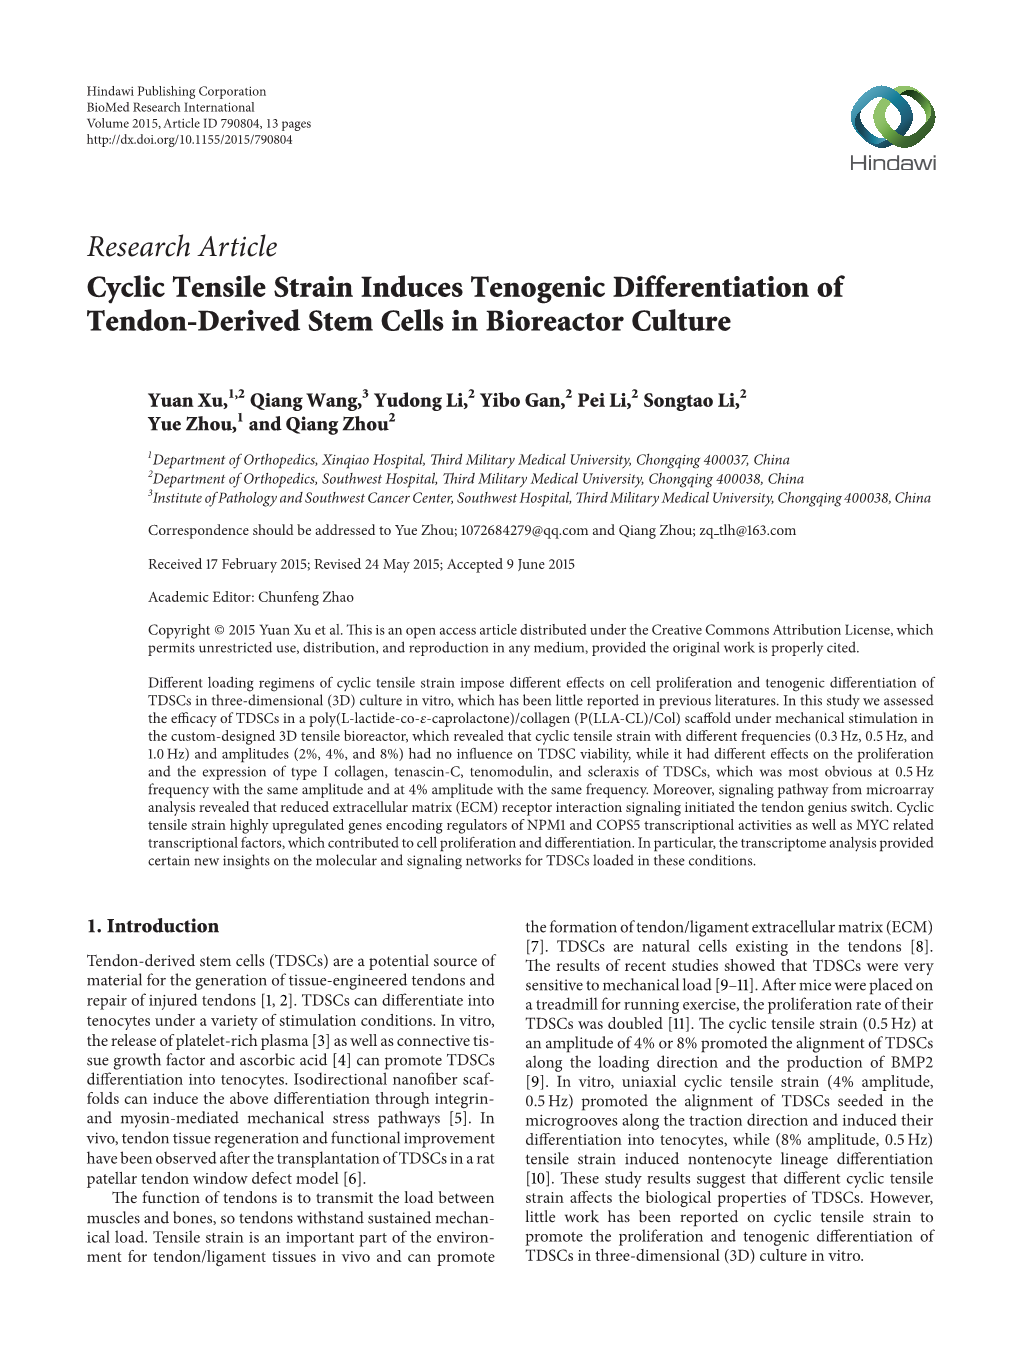 Cyclic Tensile Strain Induces Tenogenic Differentiation of Tendon-Derived Stem Cells in Bioreactor Culture